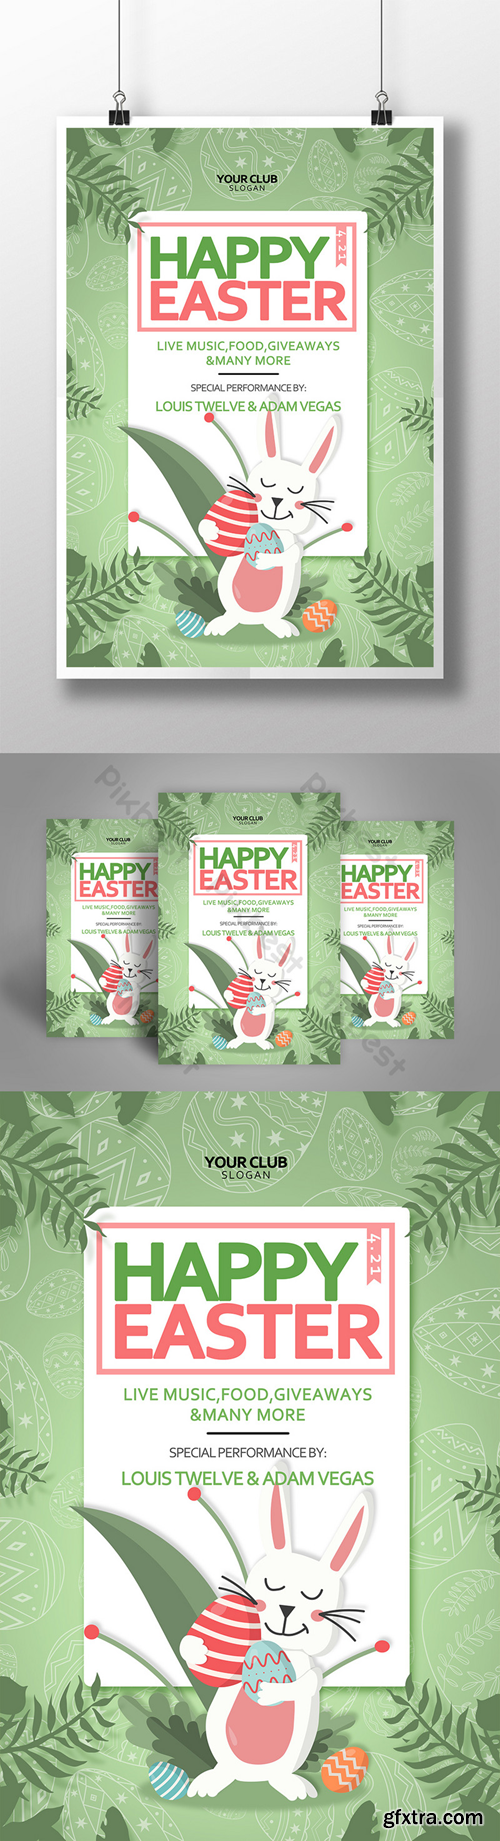 Green Happy Easter Poster Template PSD